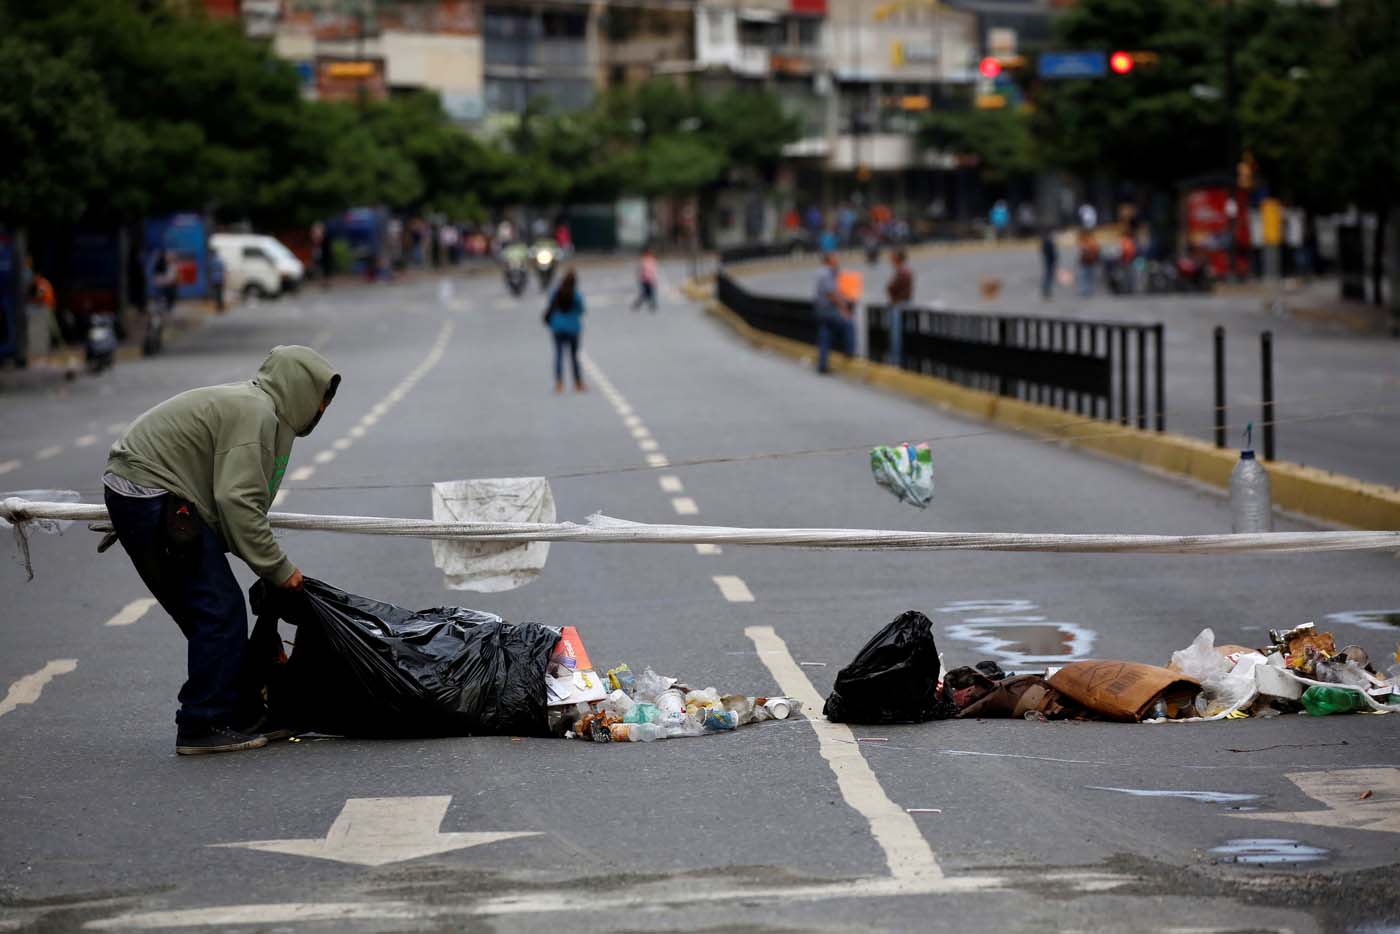 A man uses garbage to block a street during a strike called to protest against Venezuelan President Nicolas Maduro's government in Caracas, Venezuela, July 20, 2017. REUTERS/Carlos Garcia Rawlins